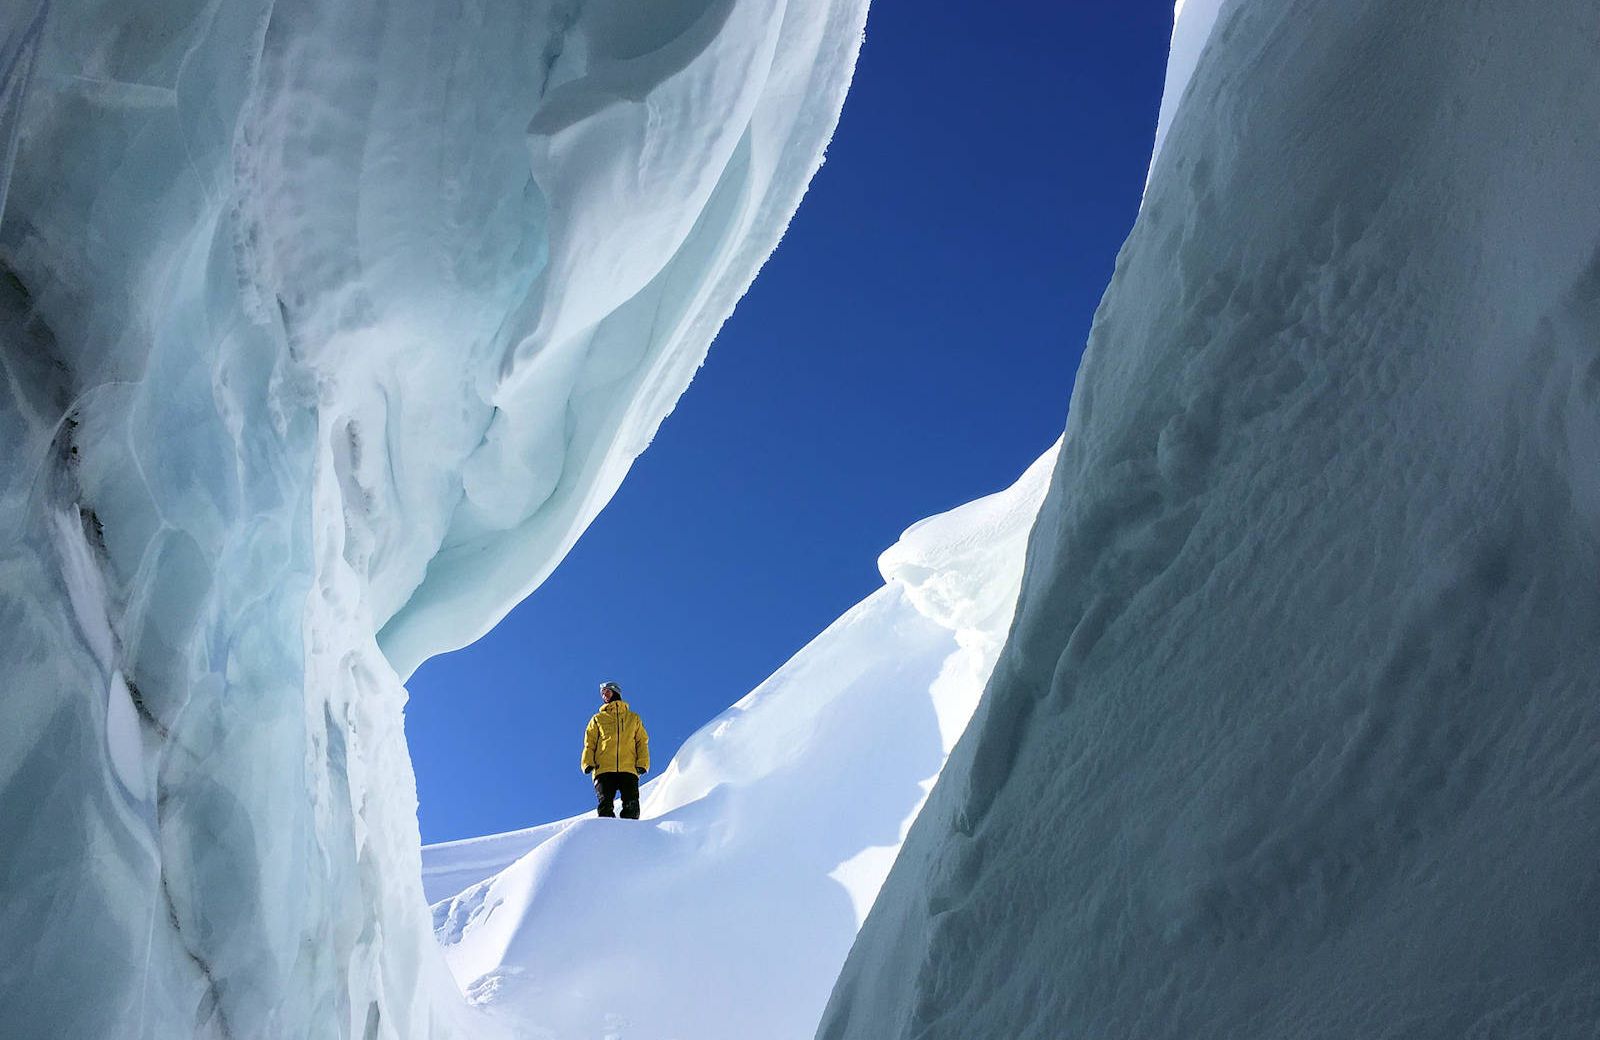 snowboarder on the edge of a crevasse